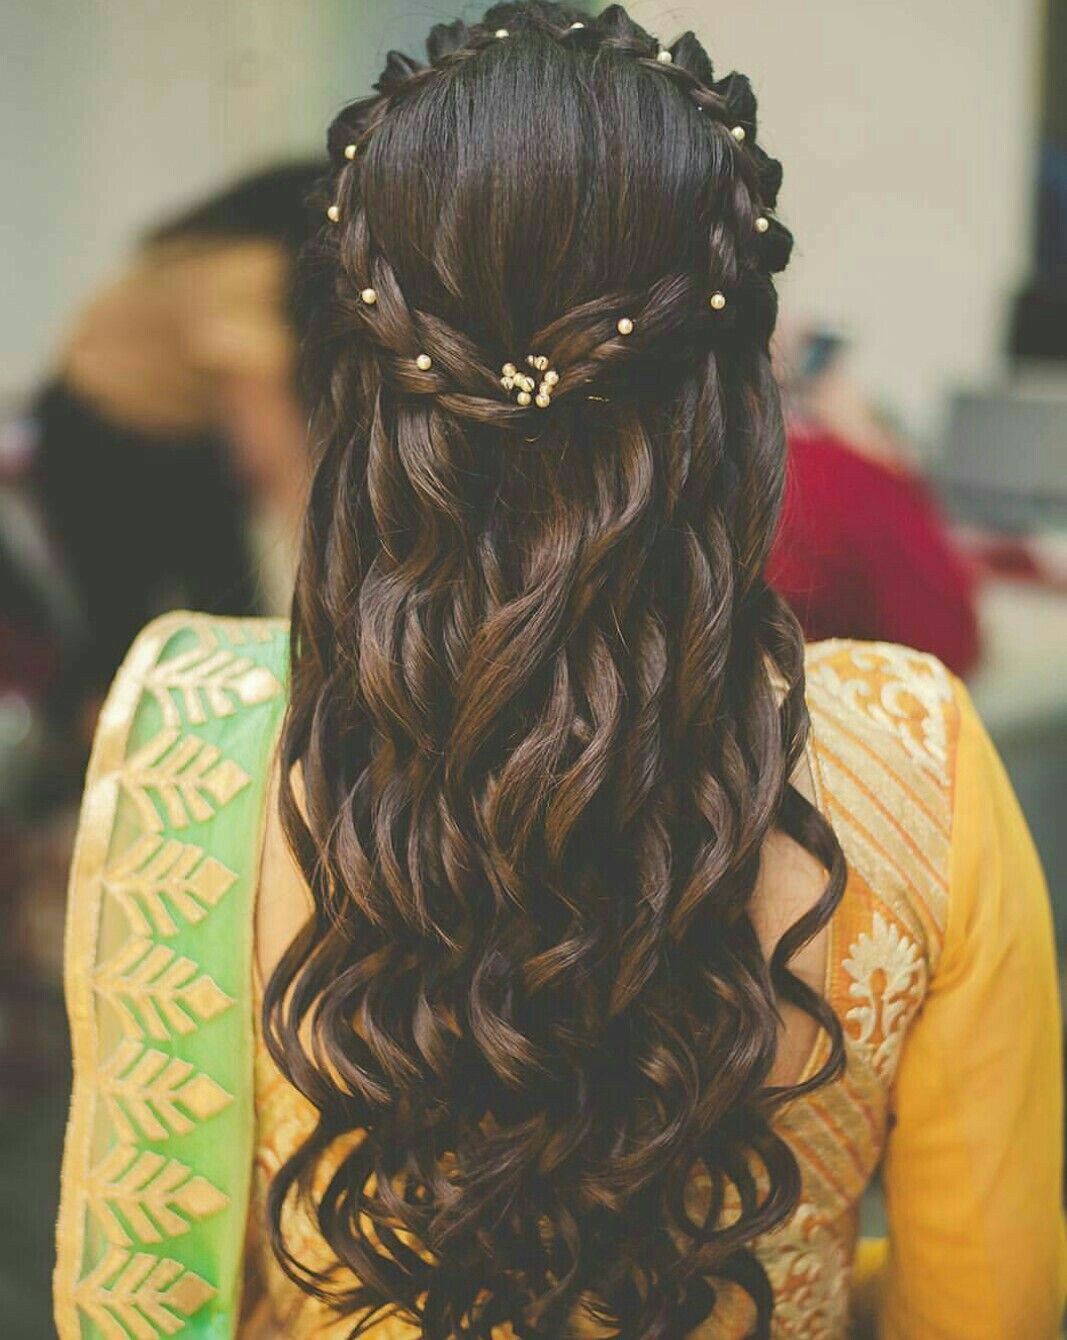 Top 7 Hairstyle Ideas For A Bengali Bride  Rig Photography